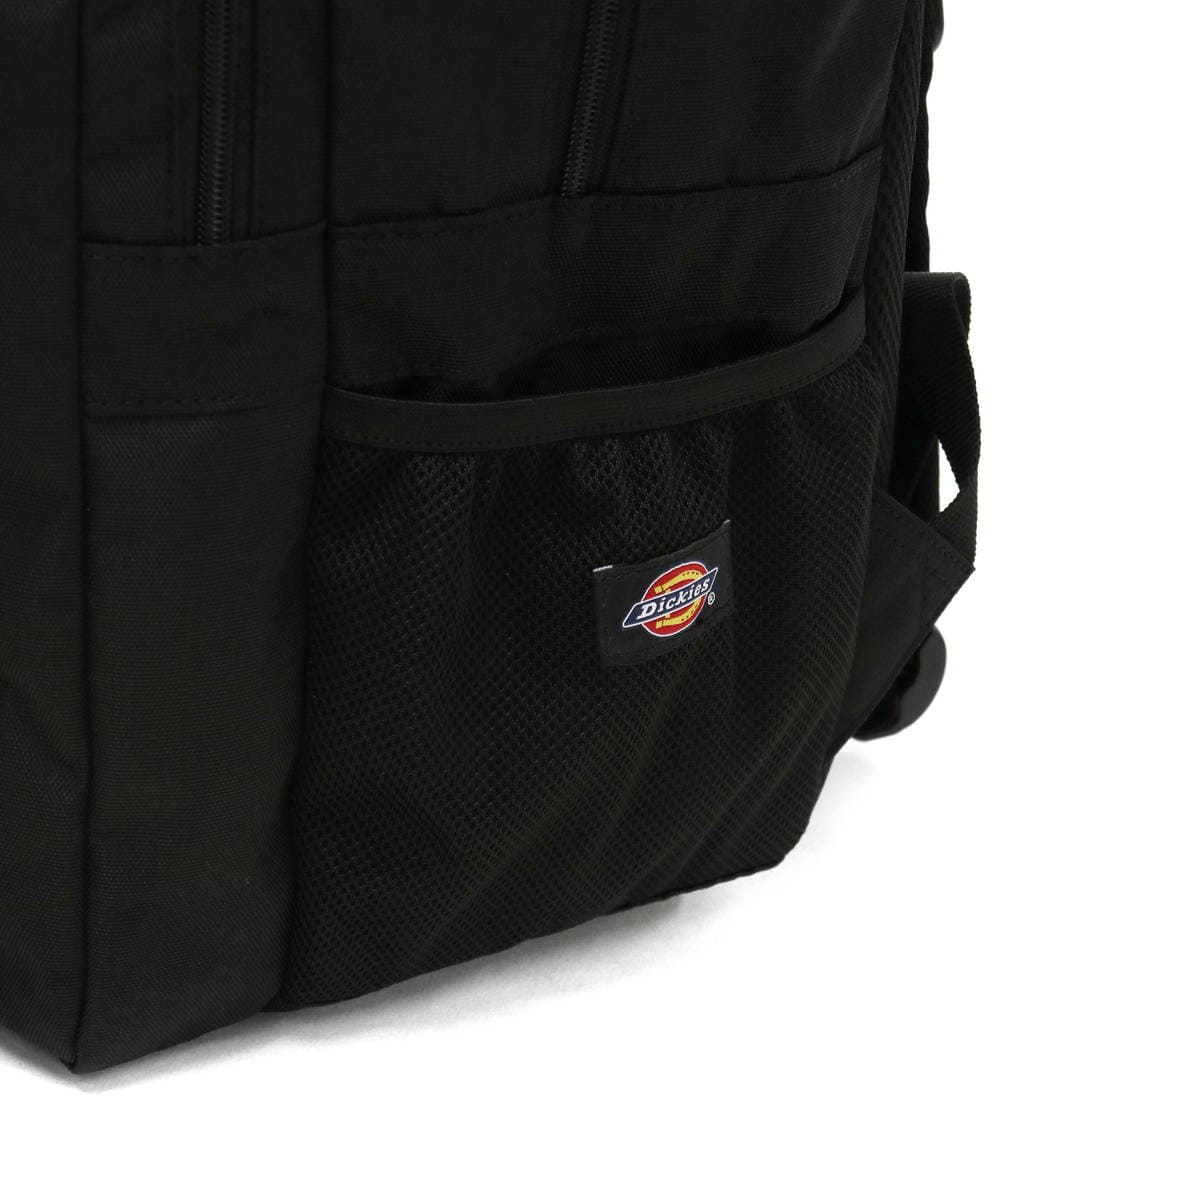 Dickies ディッキーズ ARCH LOGO STUDENT PACK リュック 2層 18421600